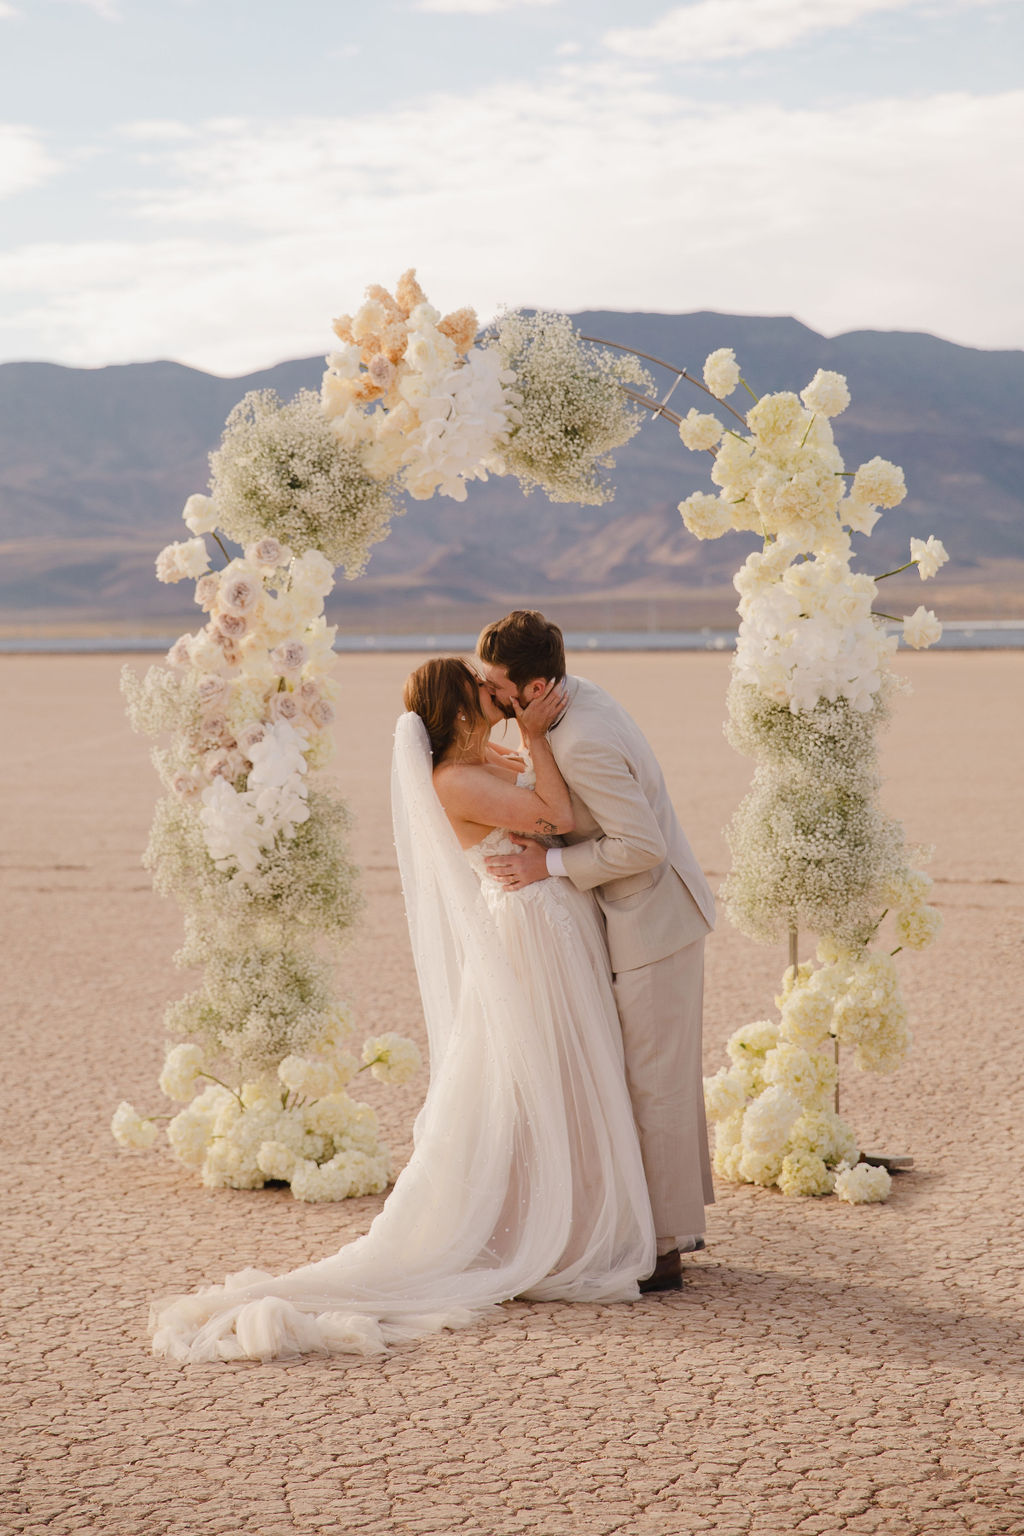 A couple holds hands during a wedding ceremony in a desert setting, officiated by a woman, under a floral arch at their Dry Lake Bed wedding